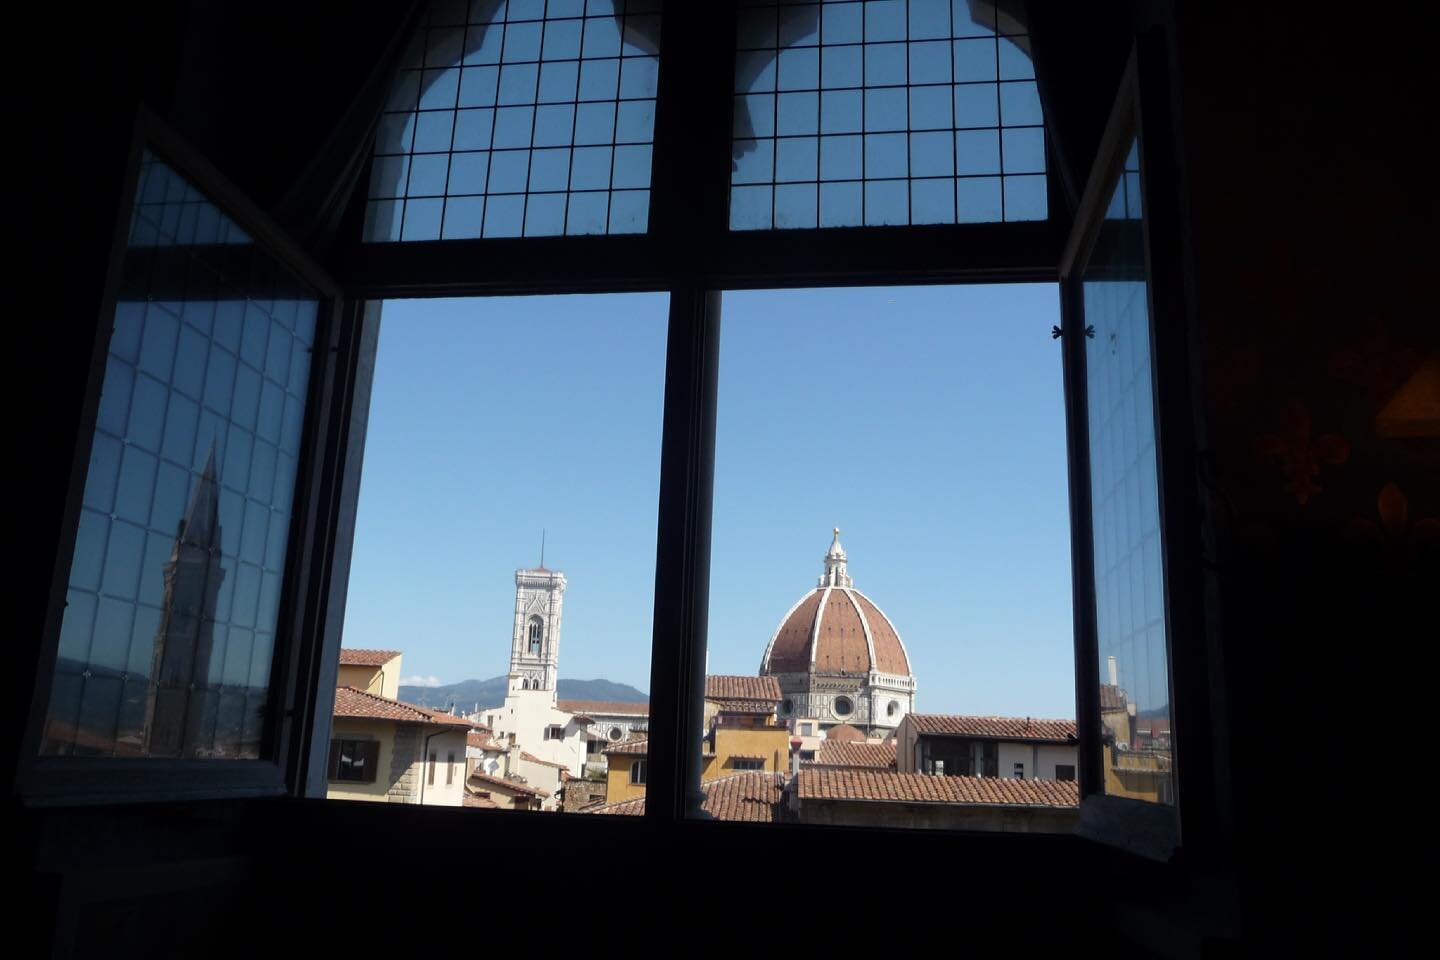 If only this was the view out my window when I woke up this morning 😔❤️🇮🇹

When travel becomes an option again, I&rsquo;m going to need at least a few days to revisit this city. 

📍Florence/Firenze, Italy 🇮🇹 

.
.
.
.

#florence #firenze #flore